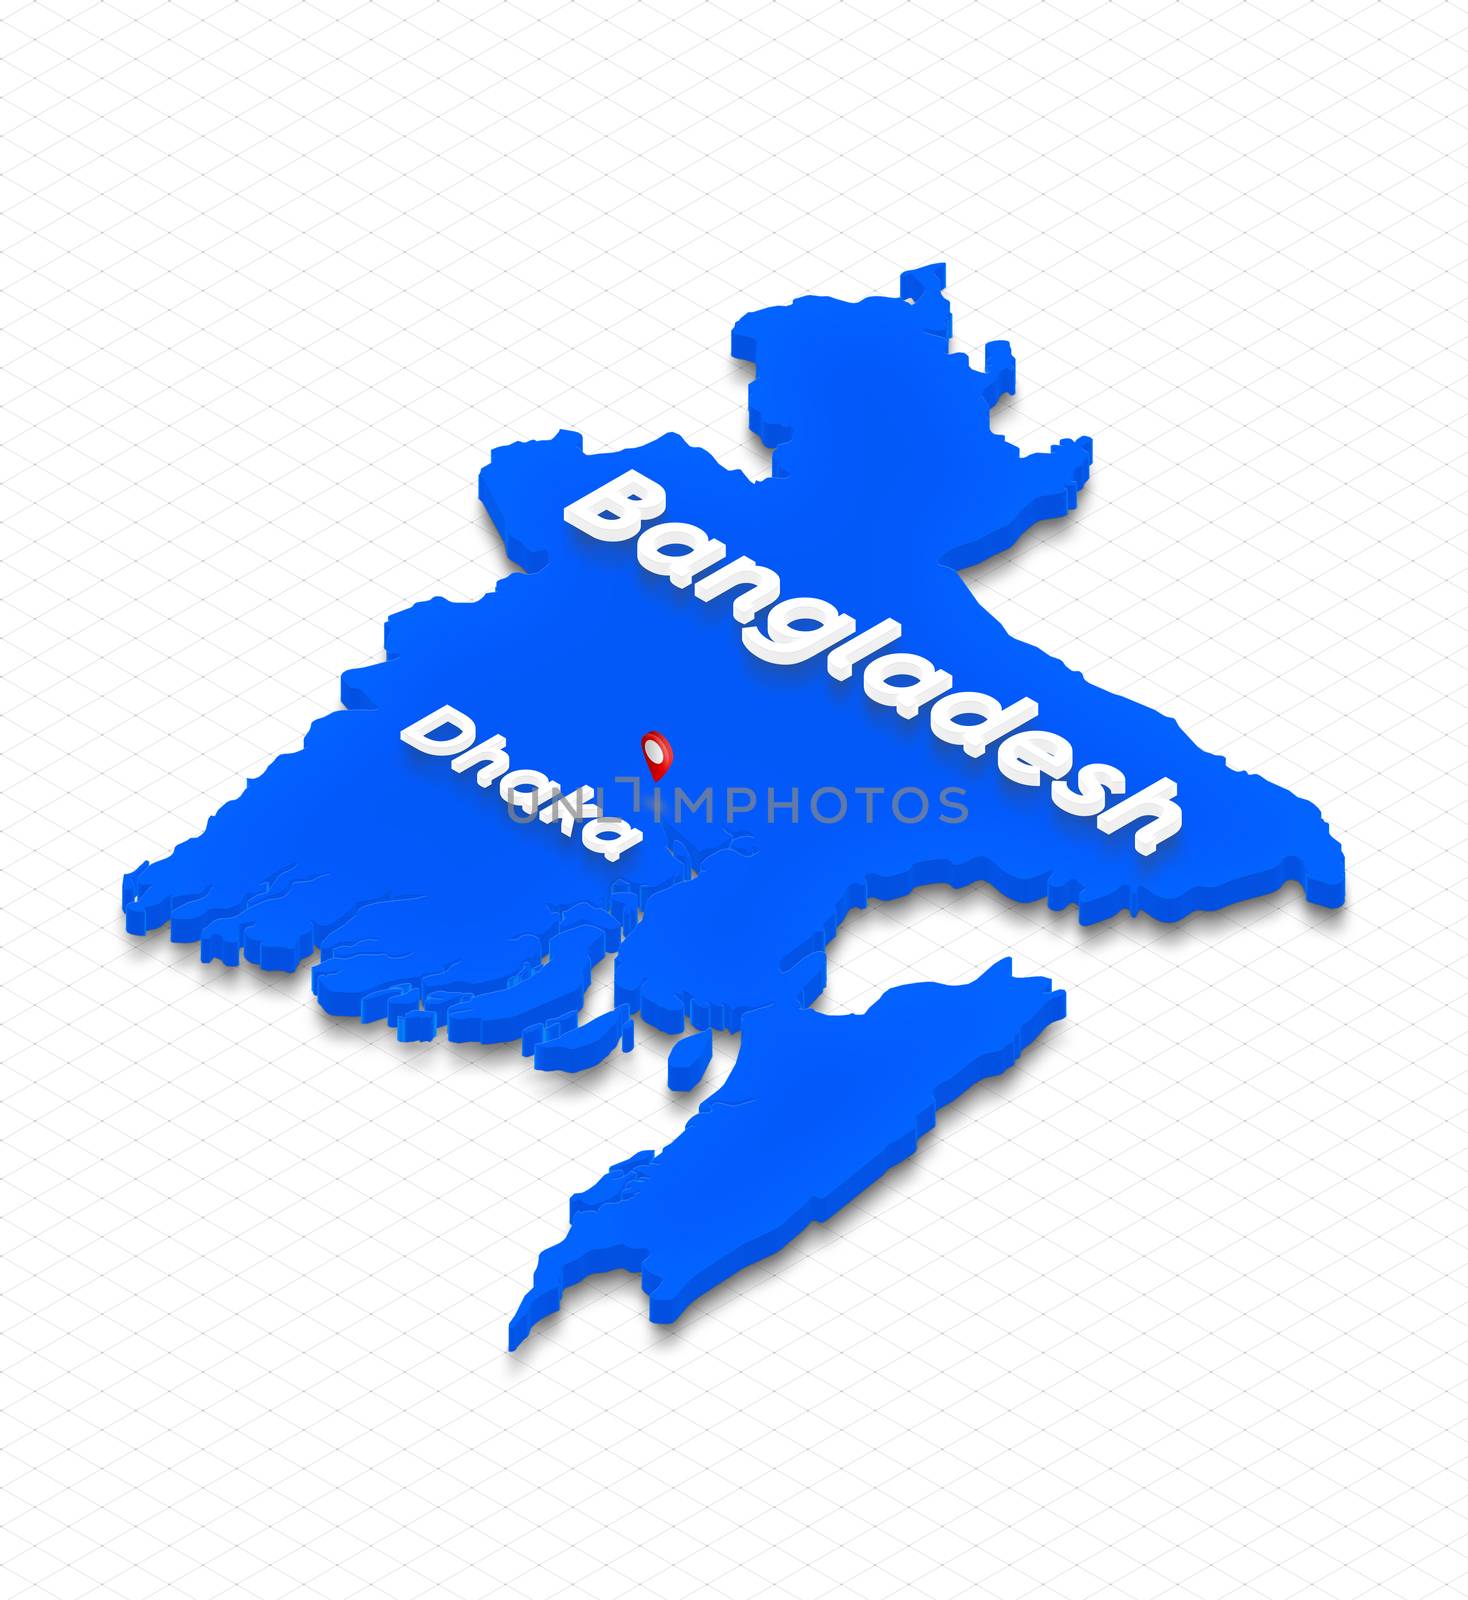 Illustration of a blue ground map of Bangladesh on grid background. Left 3D isometric perspective projection with the name of country and capital Dhaka.